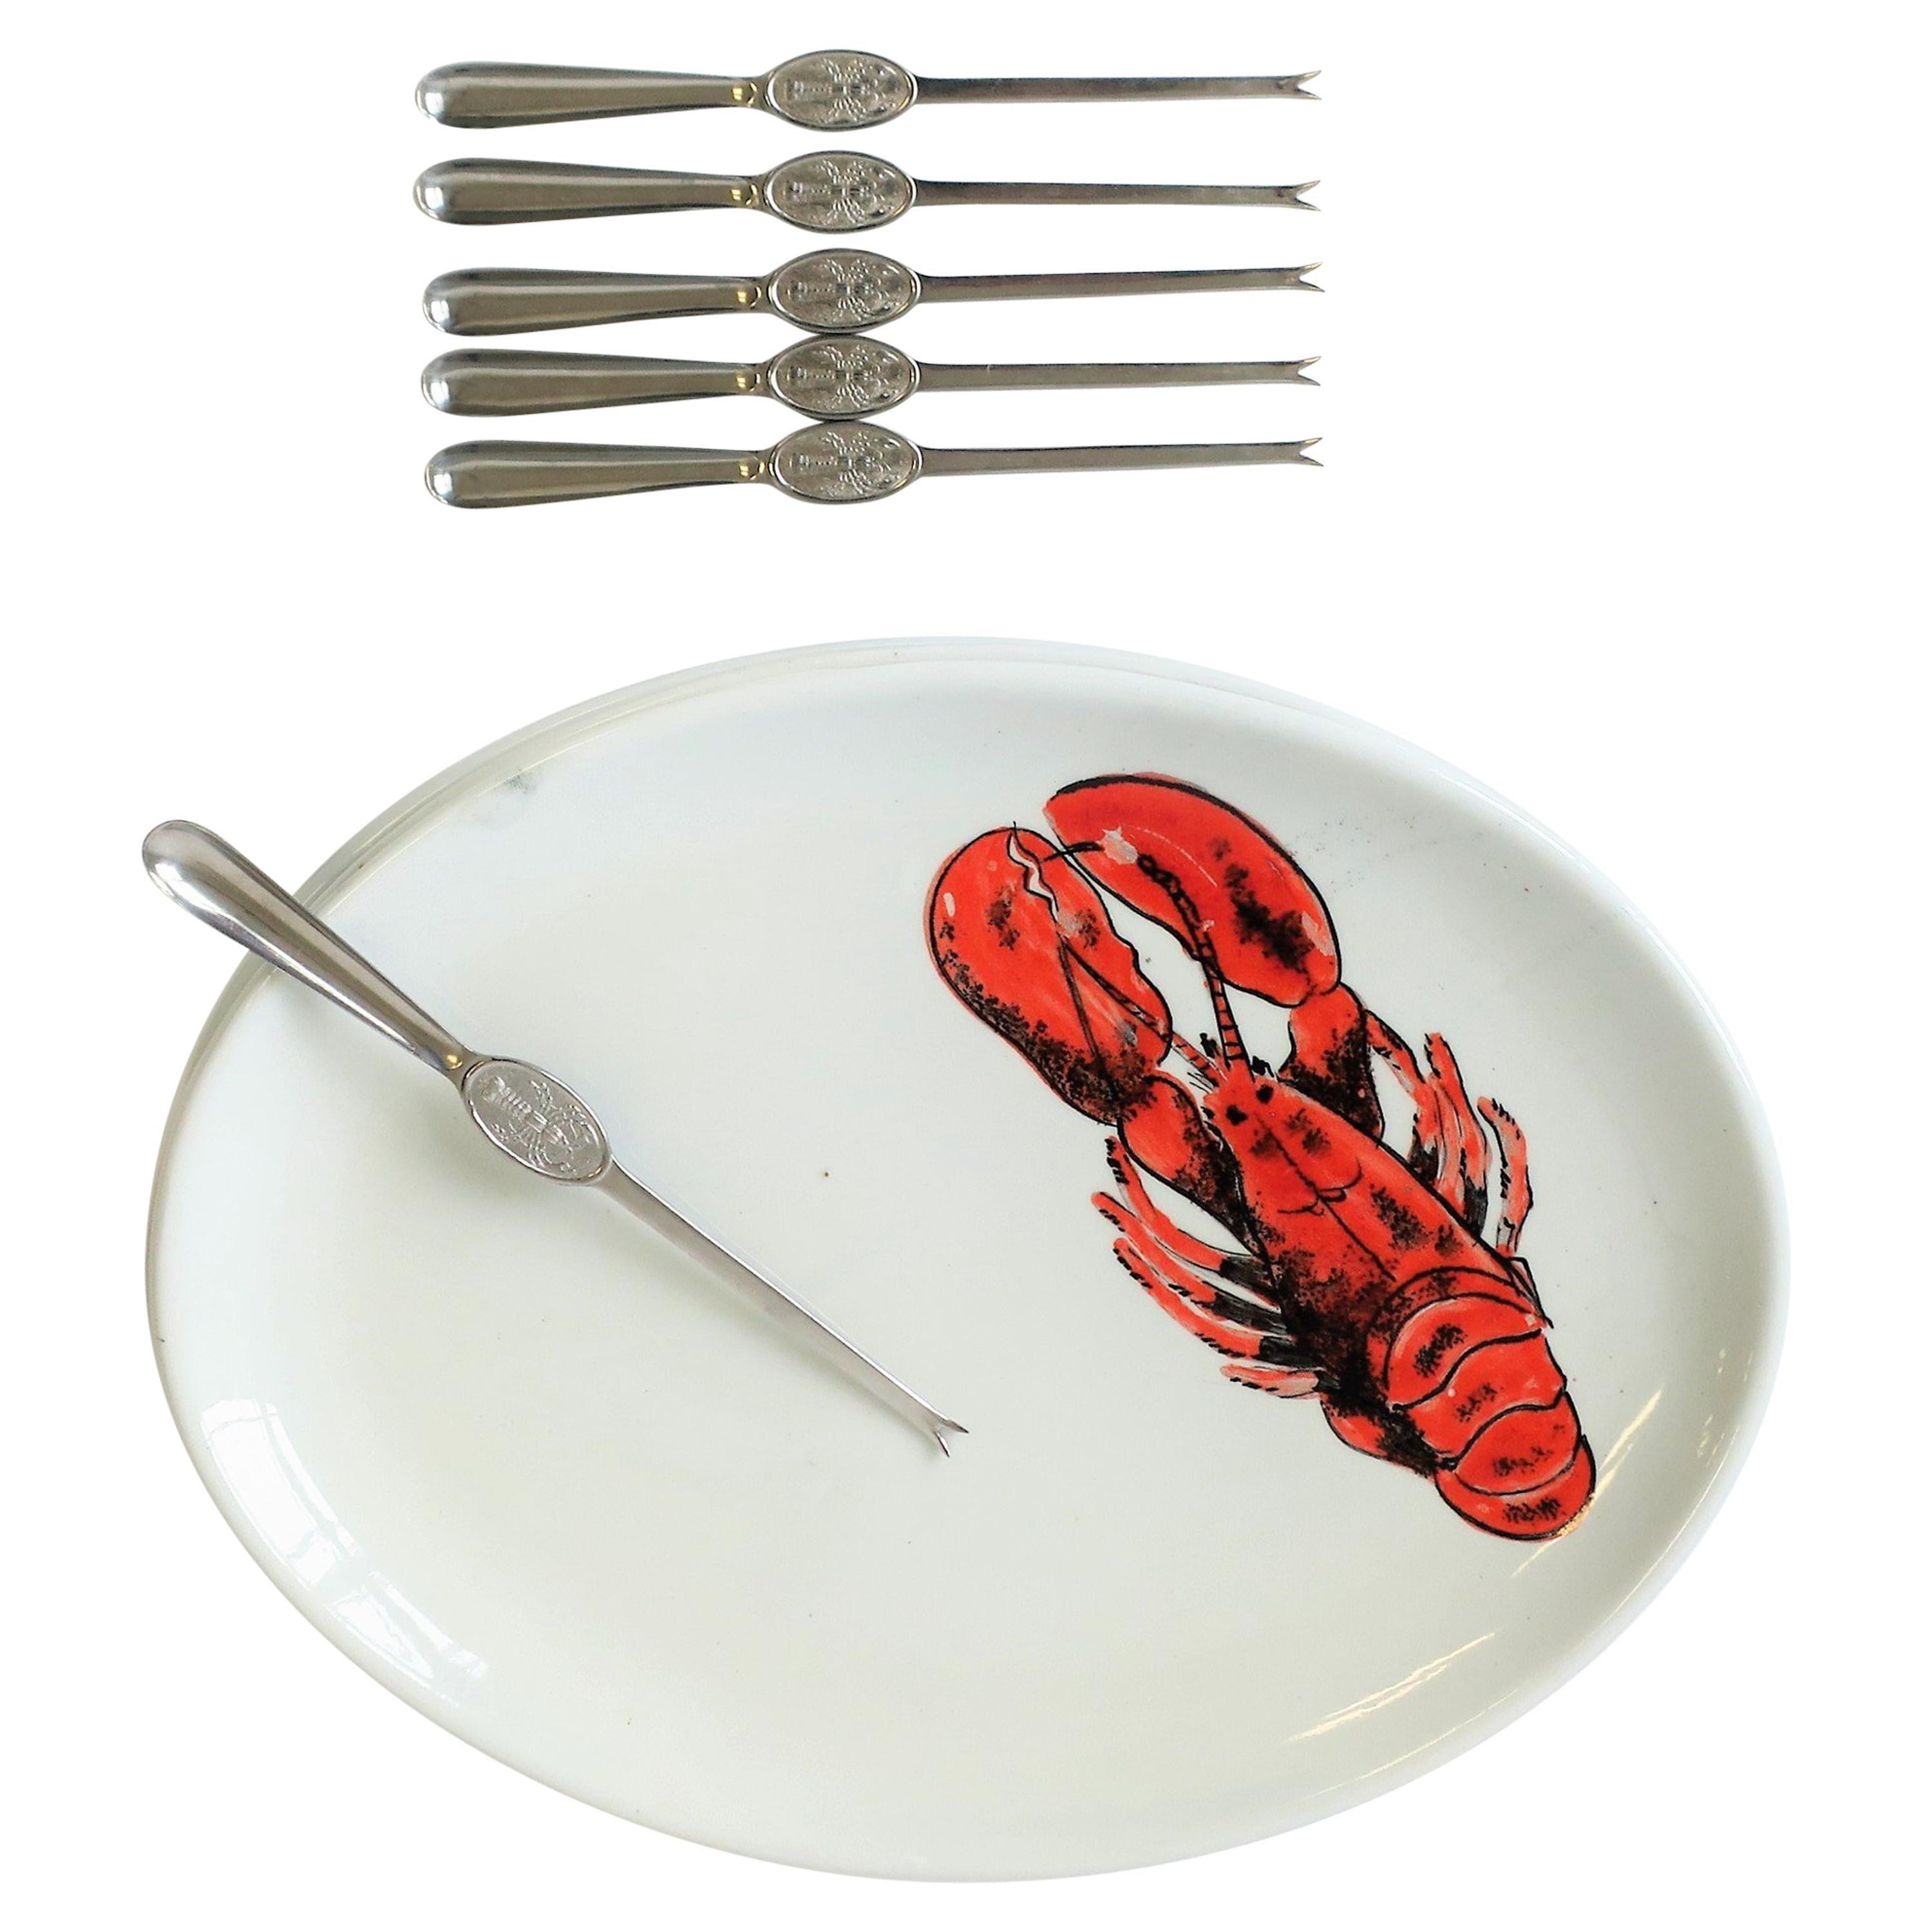 Summer Italian Lobster Dinner Plates with Forks from Sweden, Set of 6 For Sale